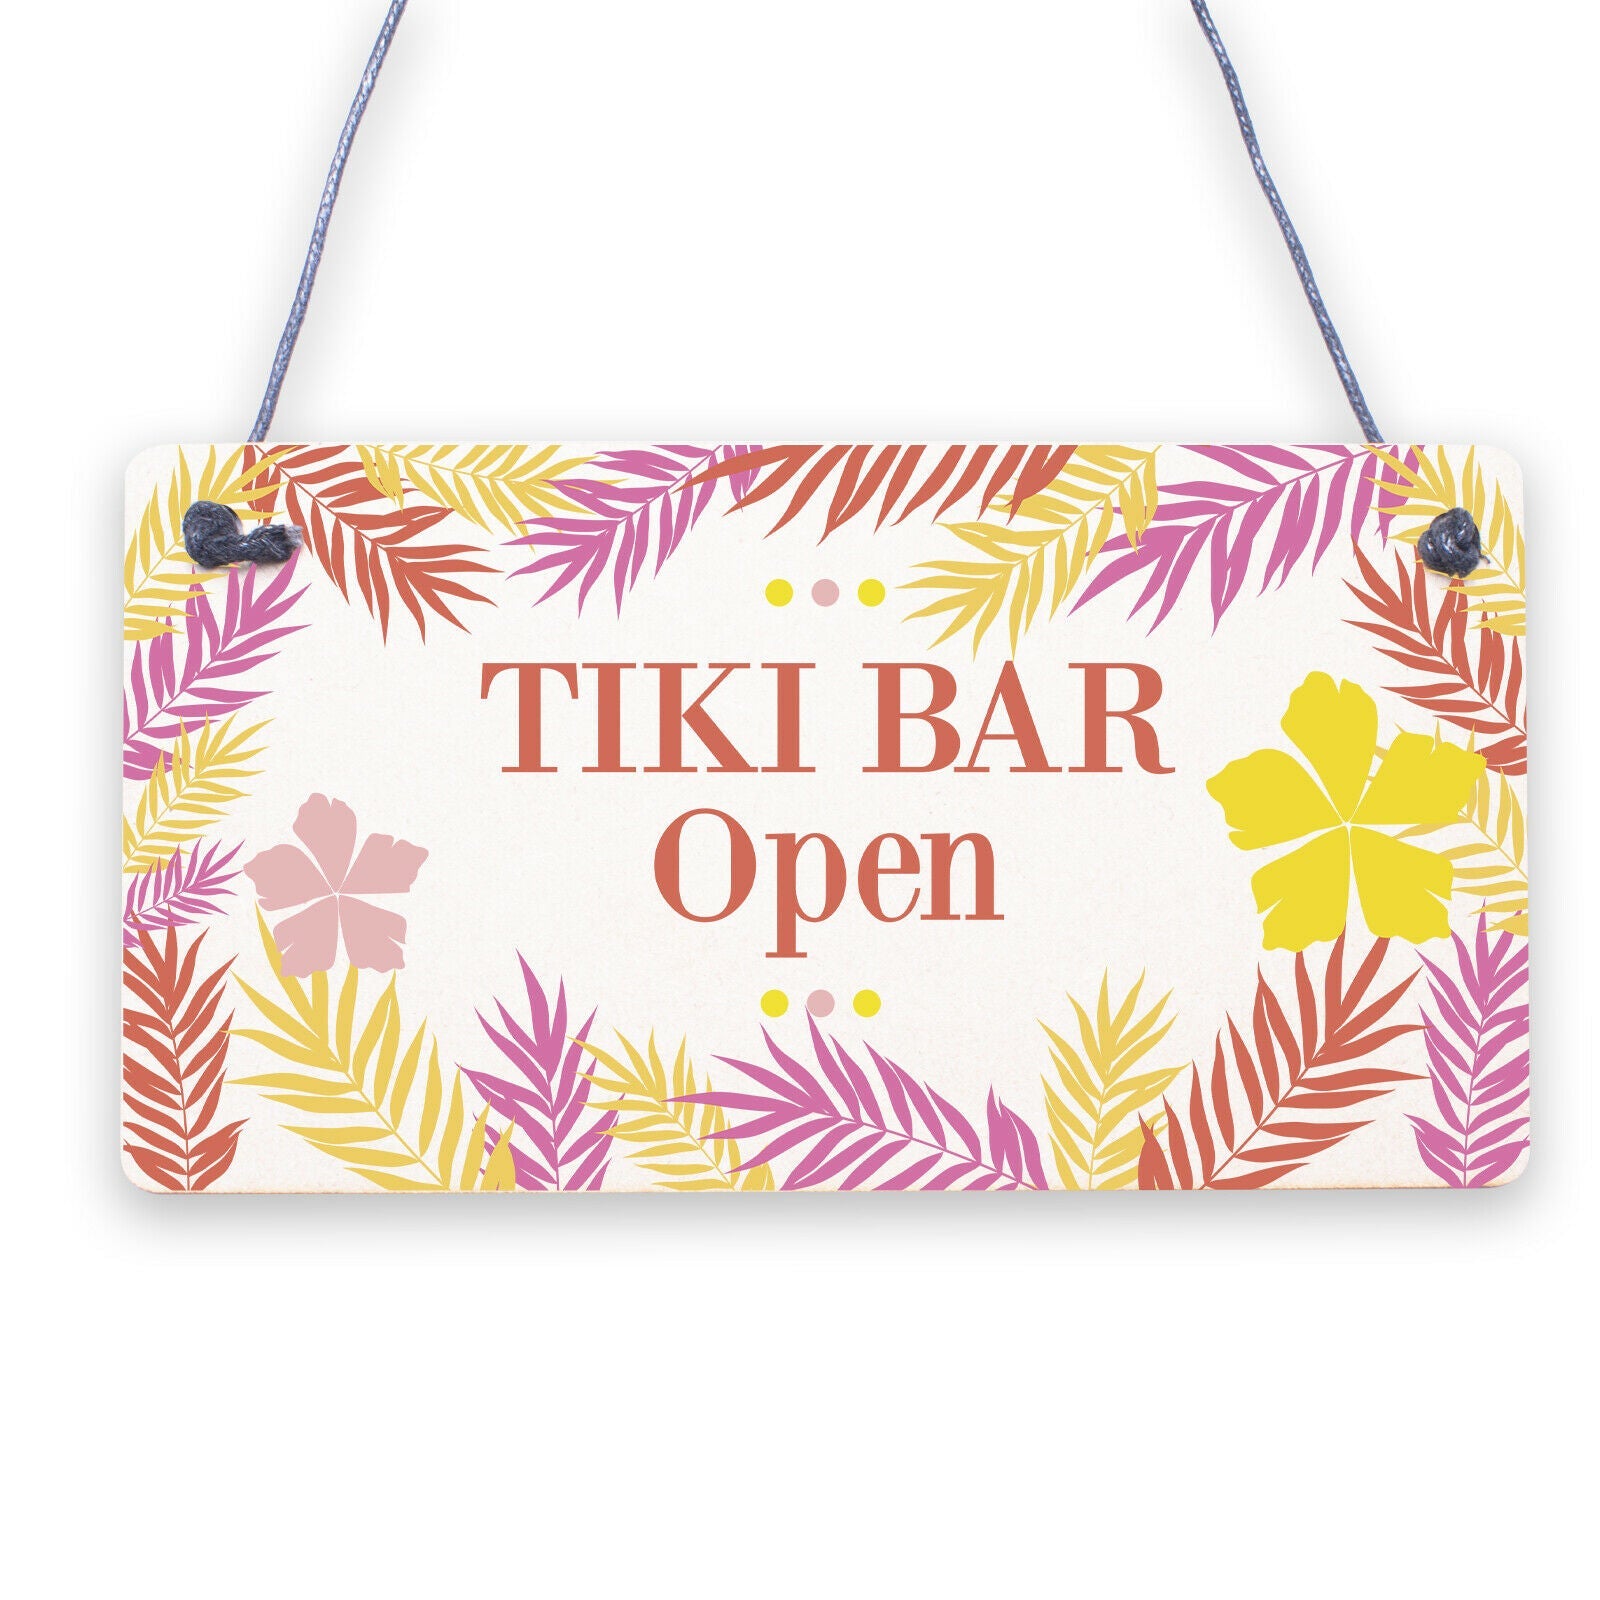 Tiki Bar Open Hanging Bar Plaque Beer Cocktail Beach Decoration Sign Friend GIFT